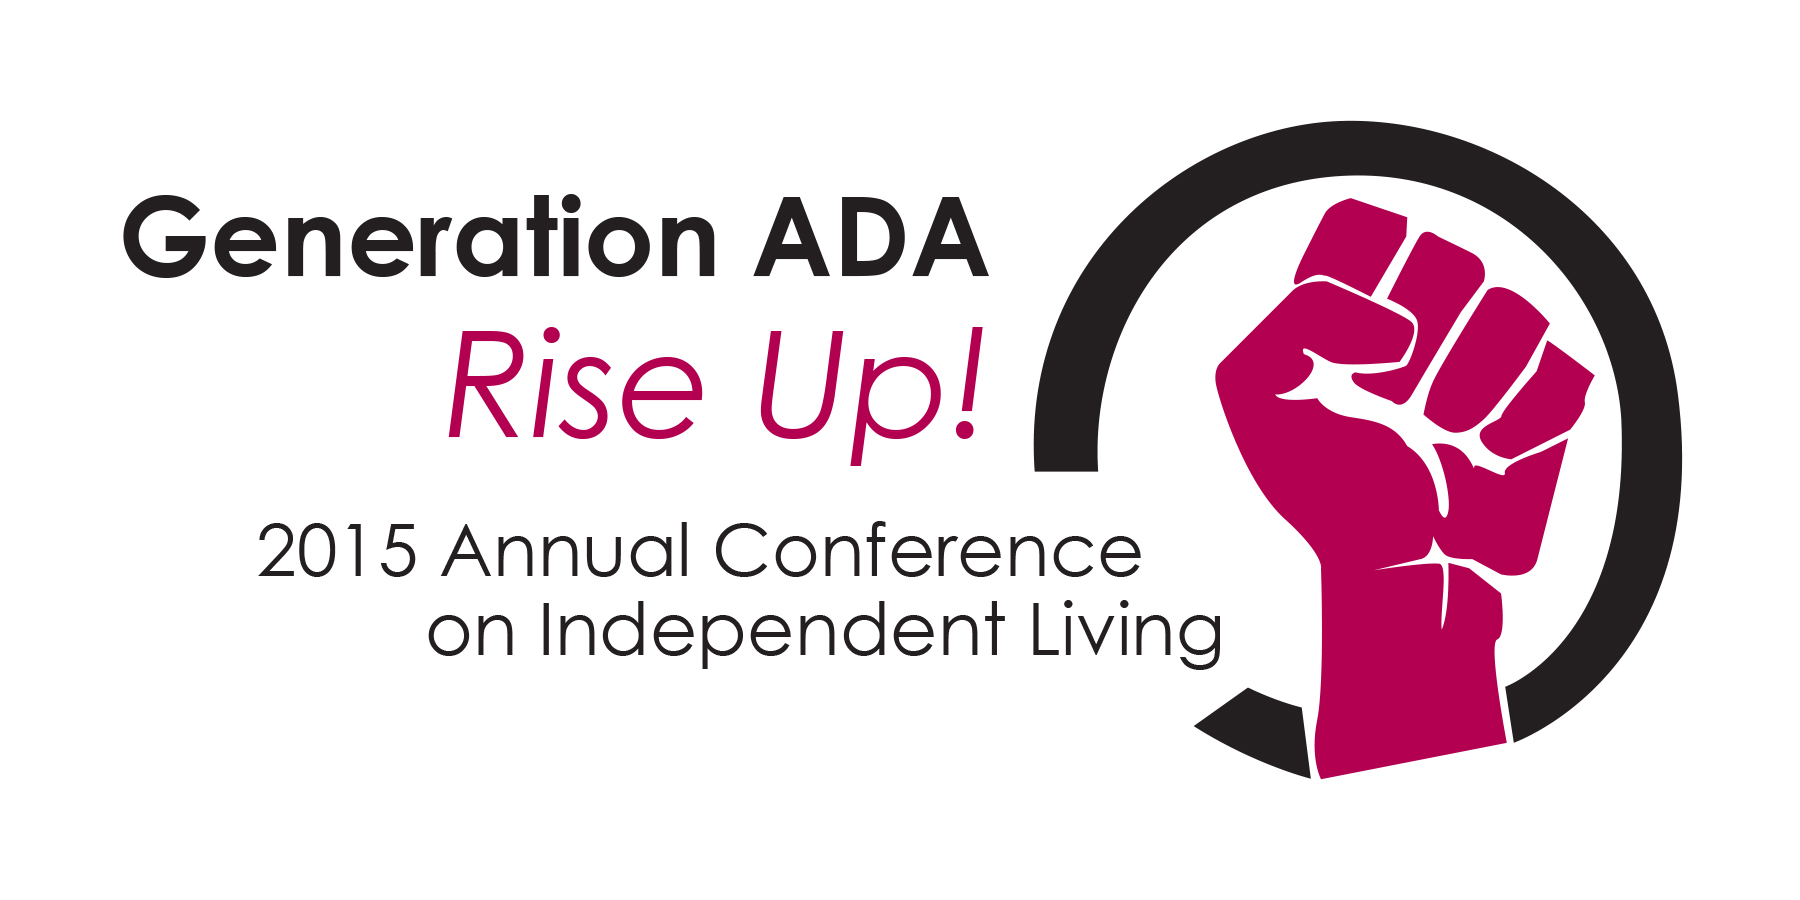 Generation ADA: Rise Up! 2015 Annual Conference on Independent Living (Image: red power fist outlined by a black circle)